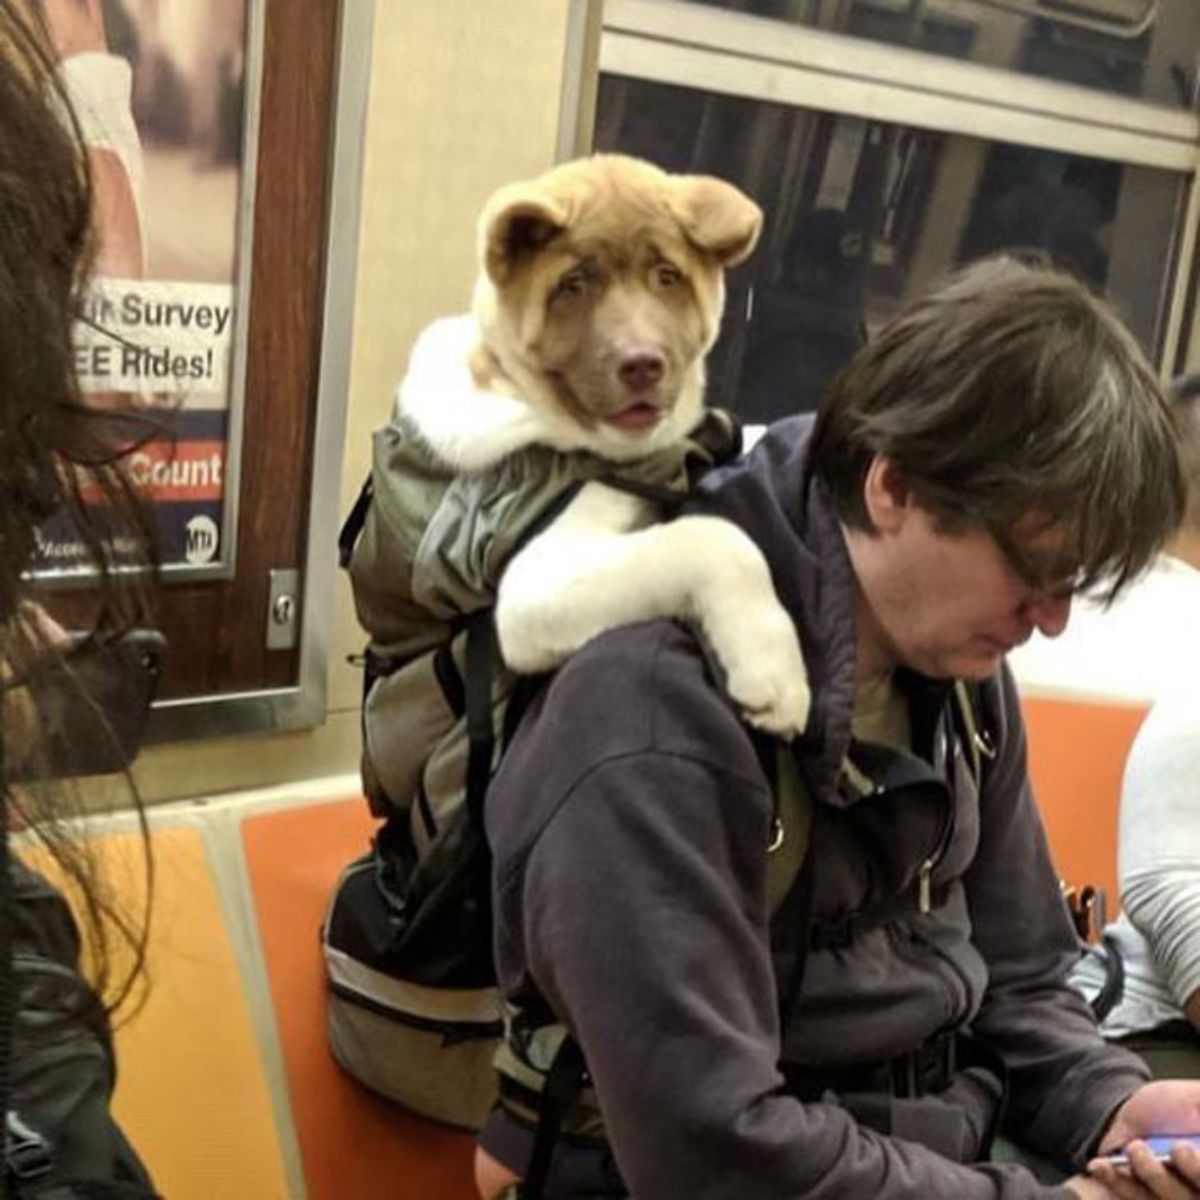 brown and white dog in a backpack being worn by a person on a train